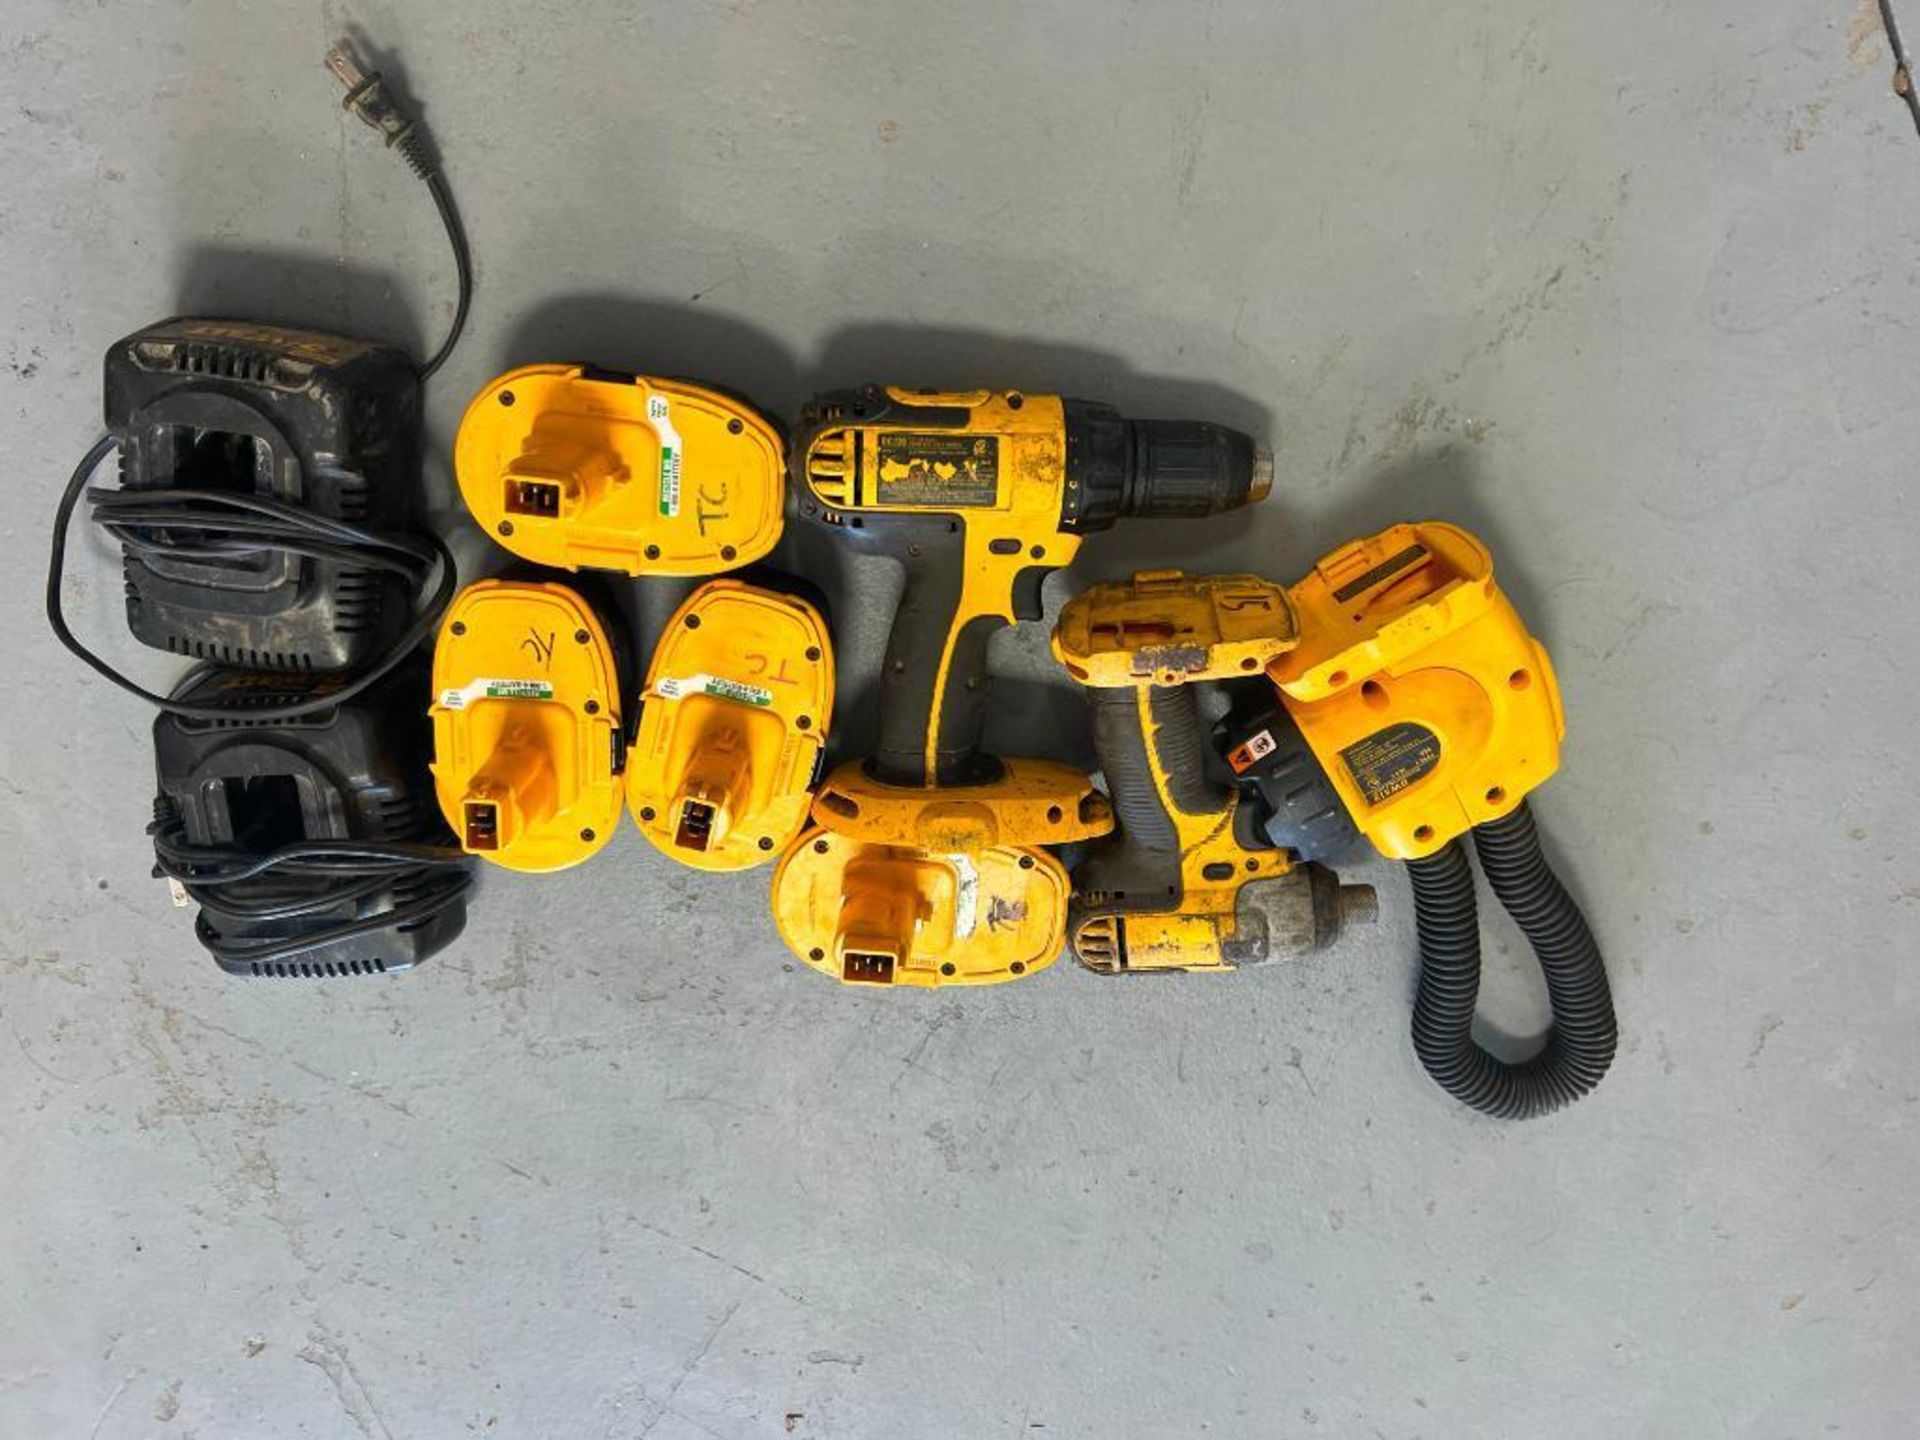 DeWalt DW919 Rechargeable Light, Impact Wrench, Batteries & Chargers. Located in Mt. Pleasant, IA